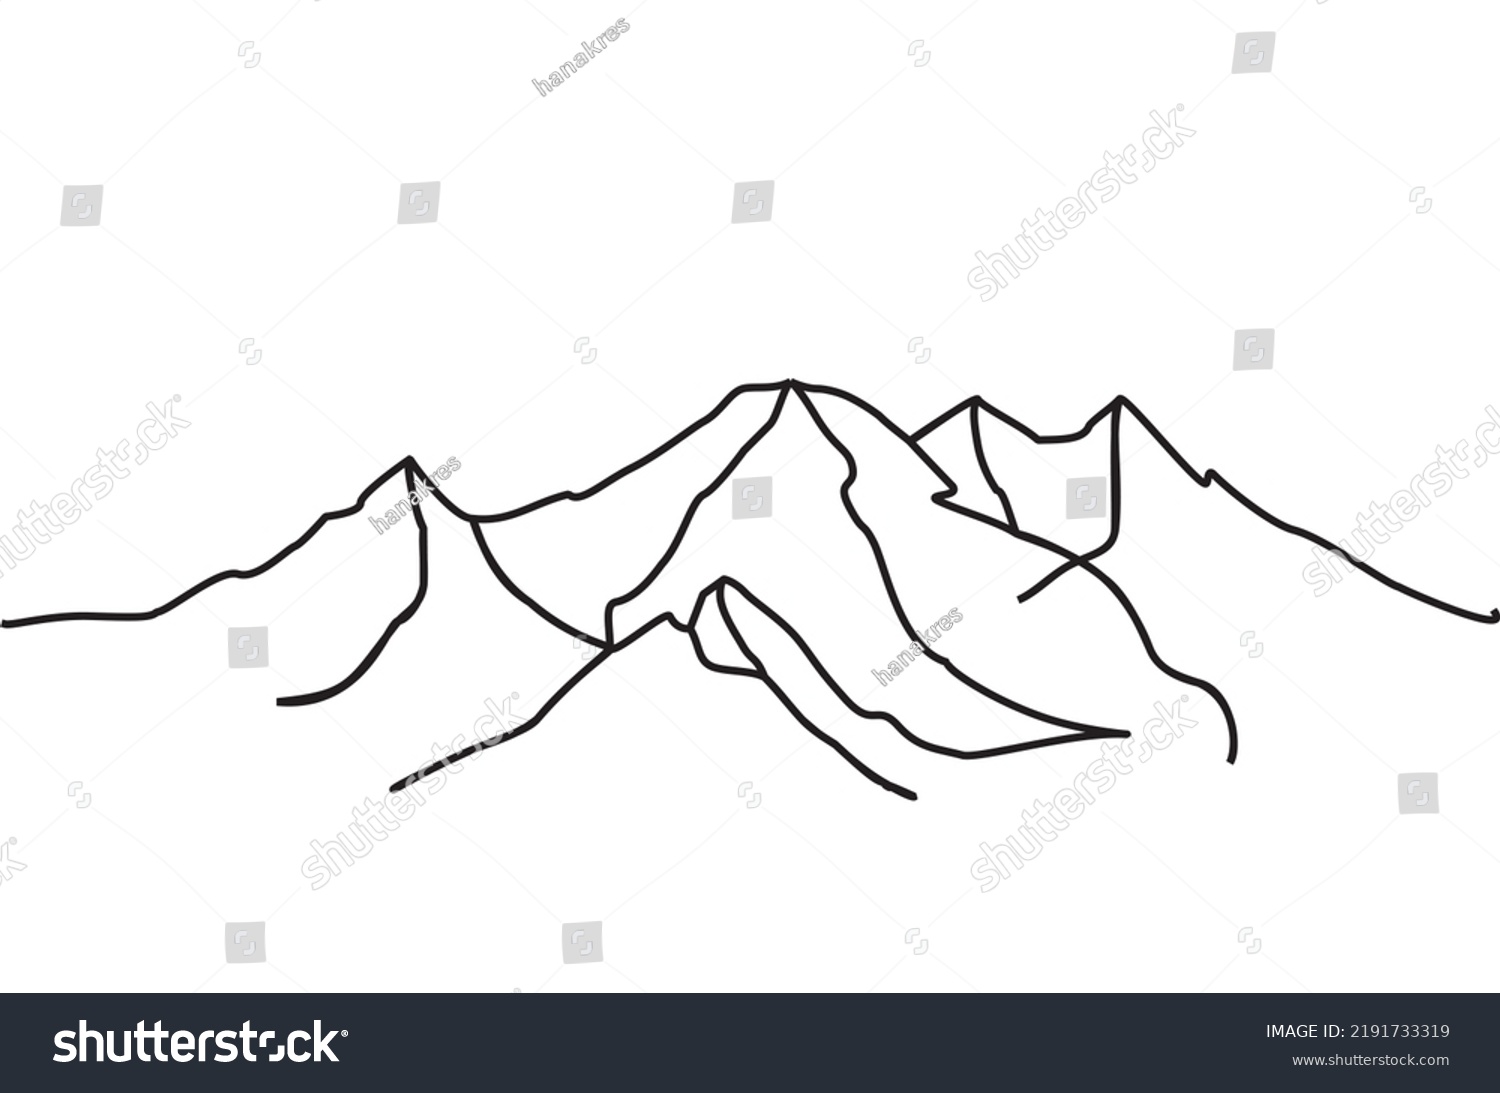 One Continuous Line Drawing Steep Rock Stock Vector (Royalty Free ...